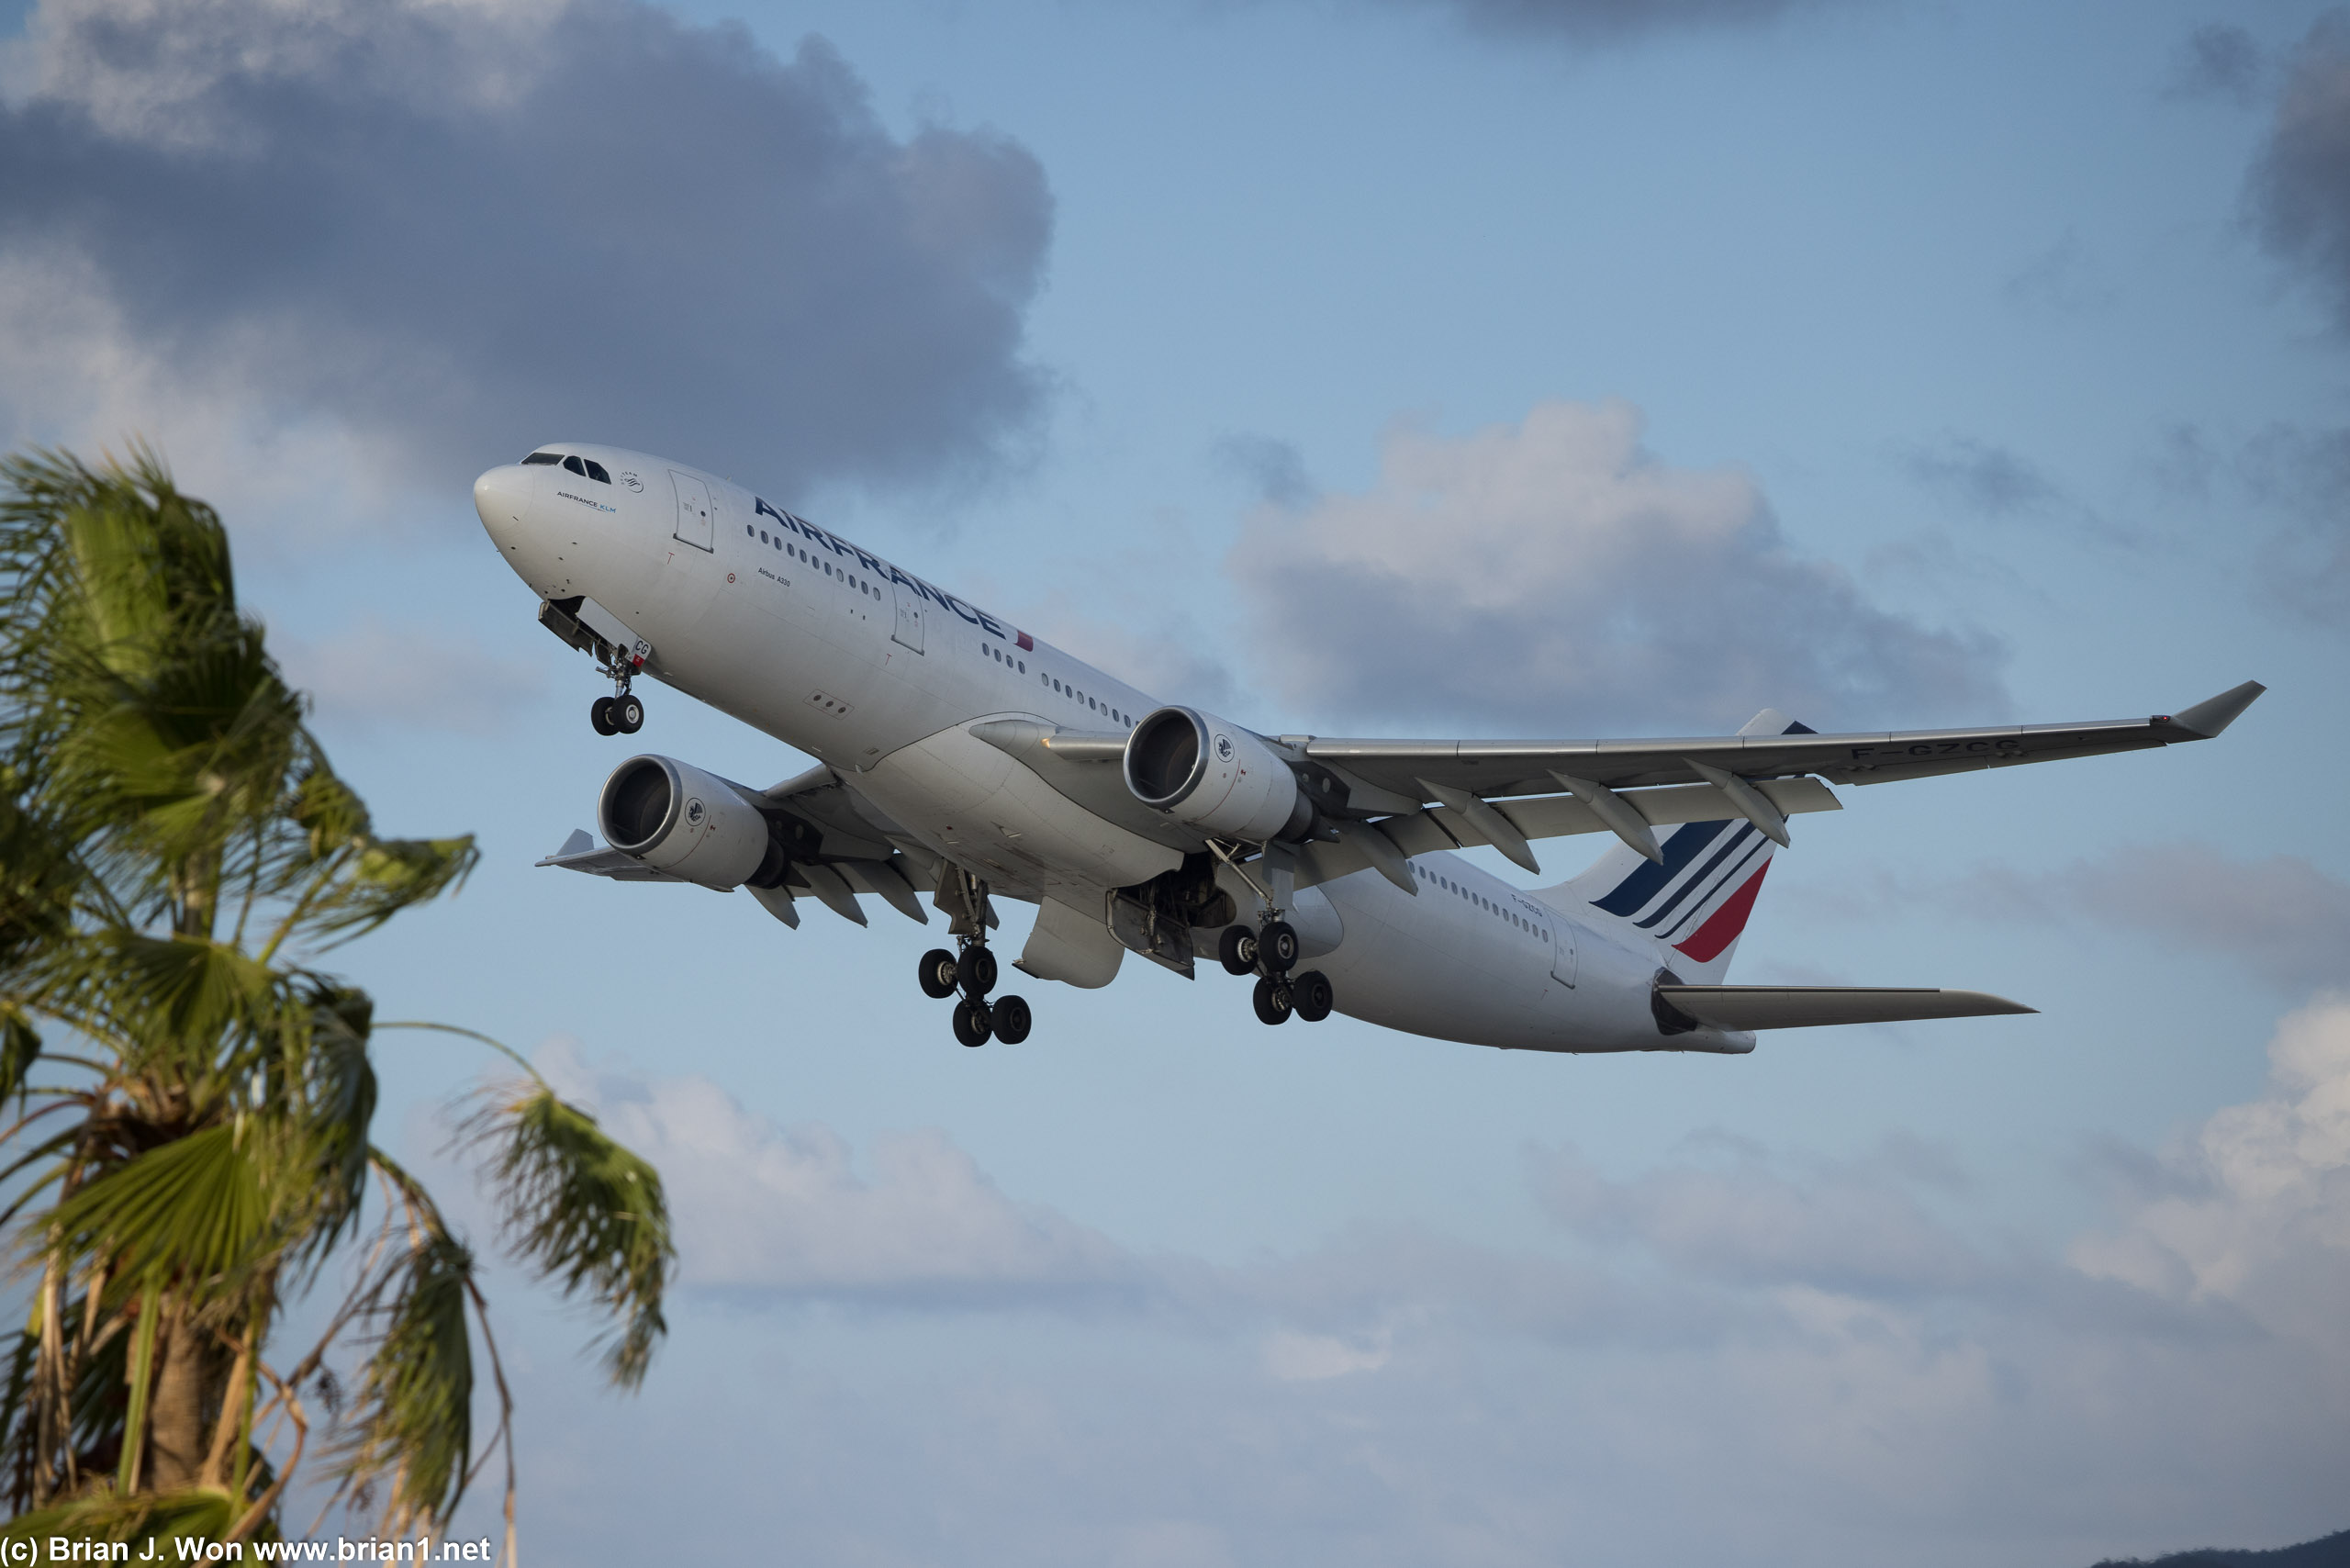 Palm trees and wide-body airplanes, how can you go wrong?